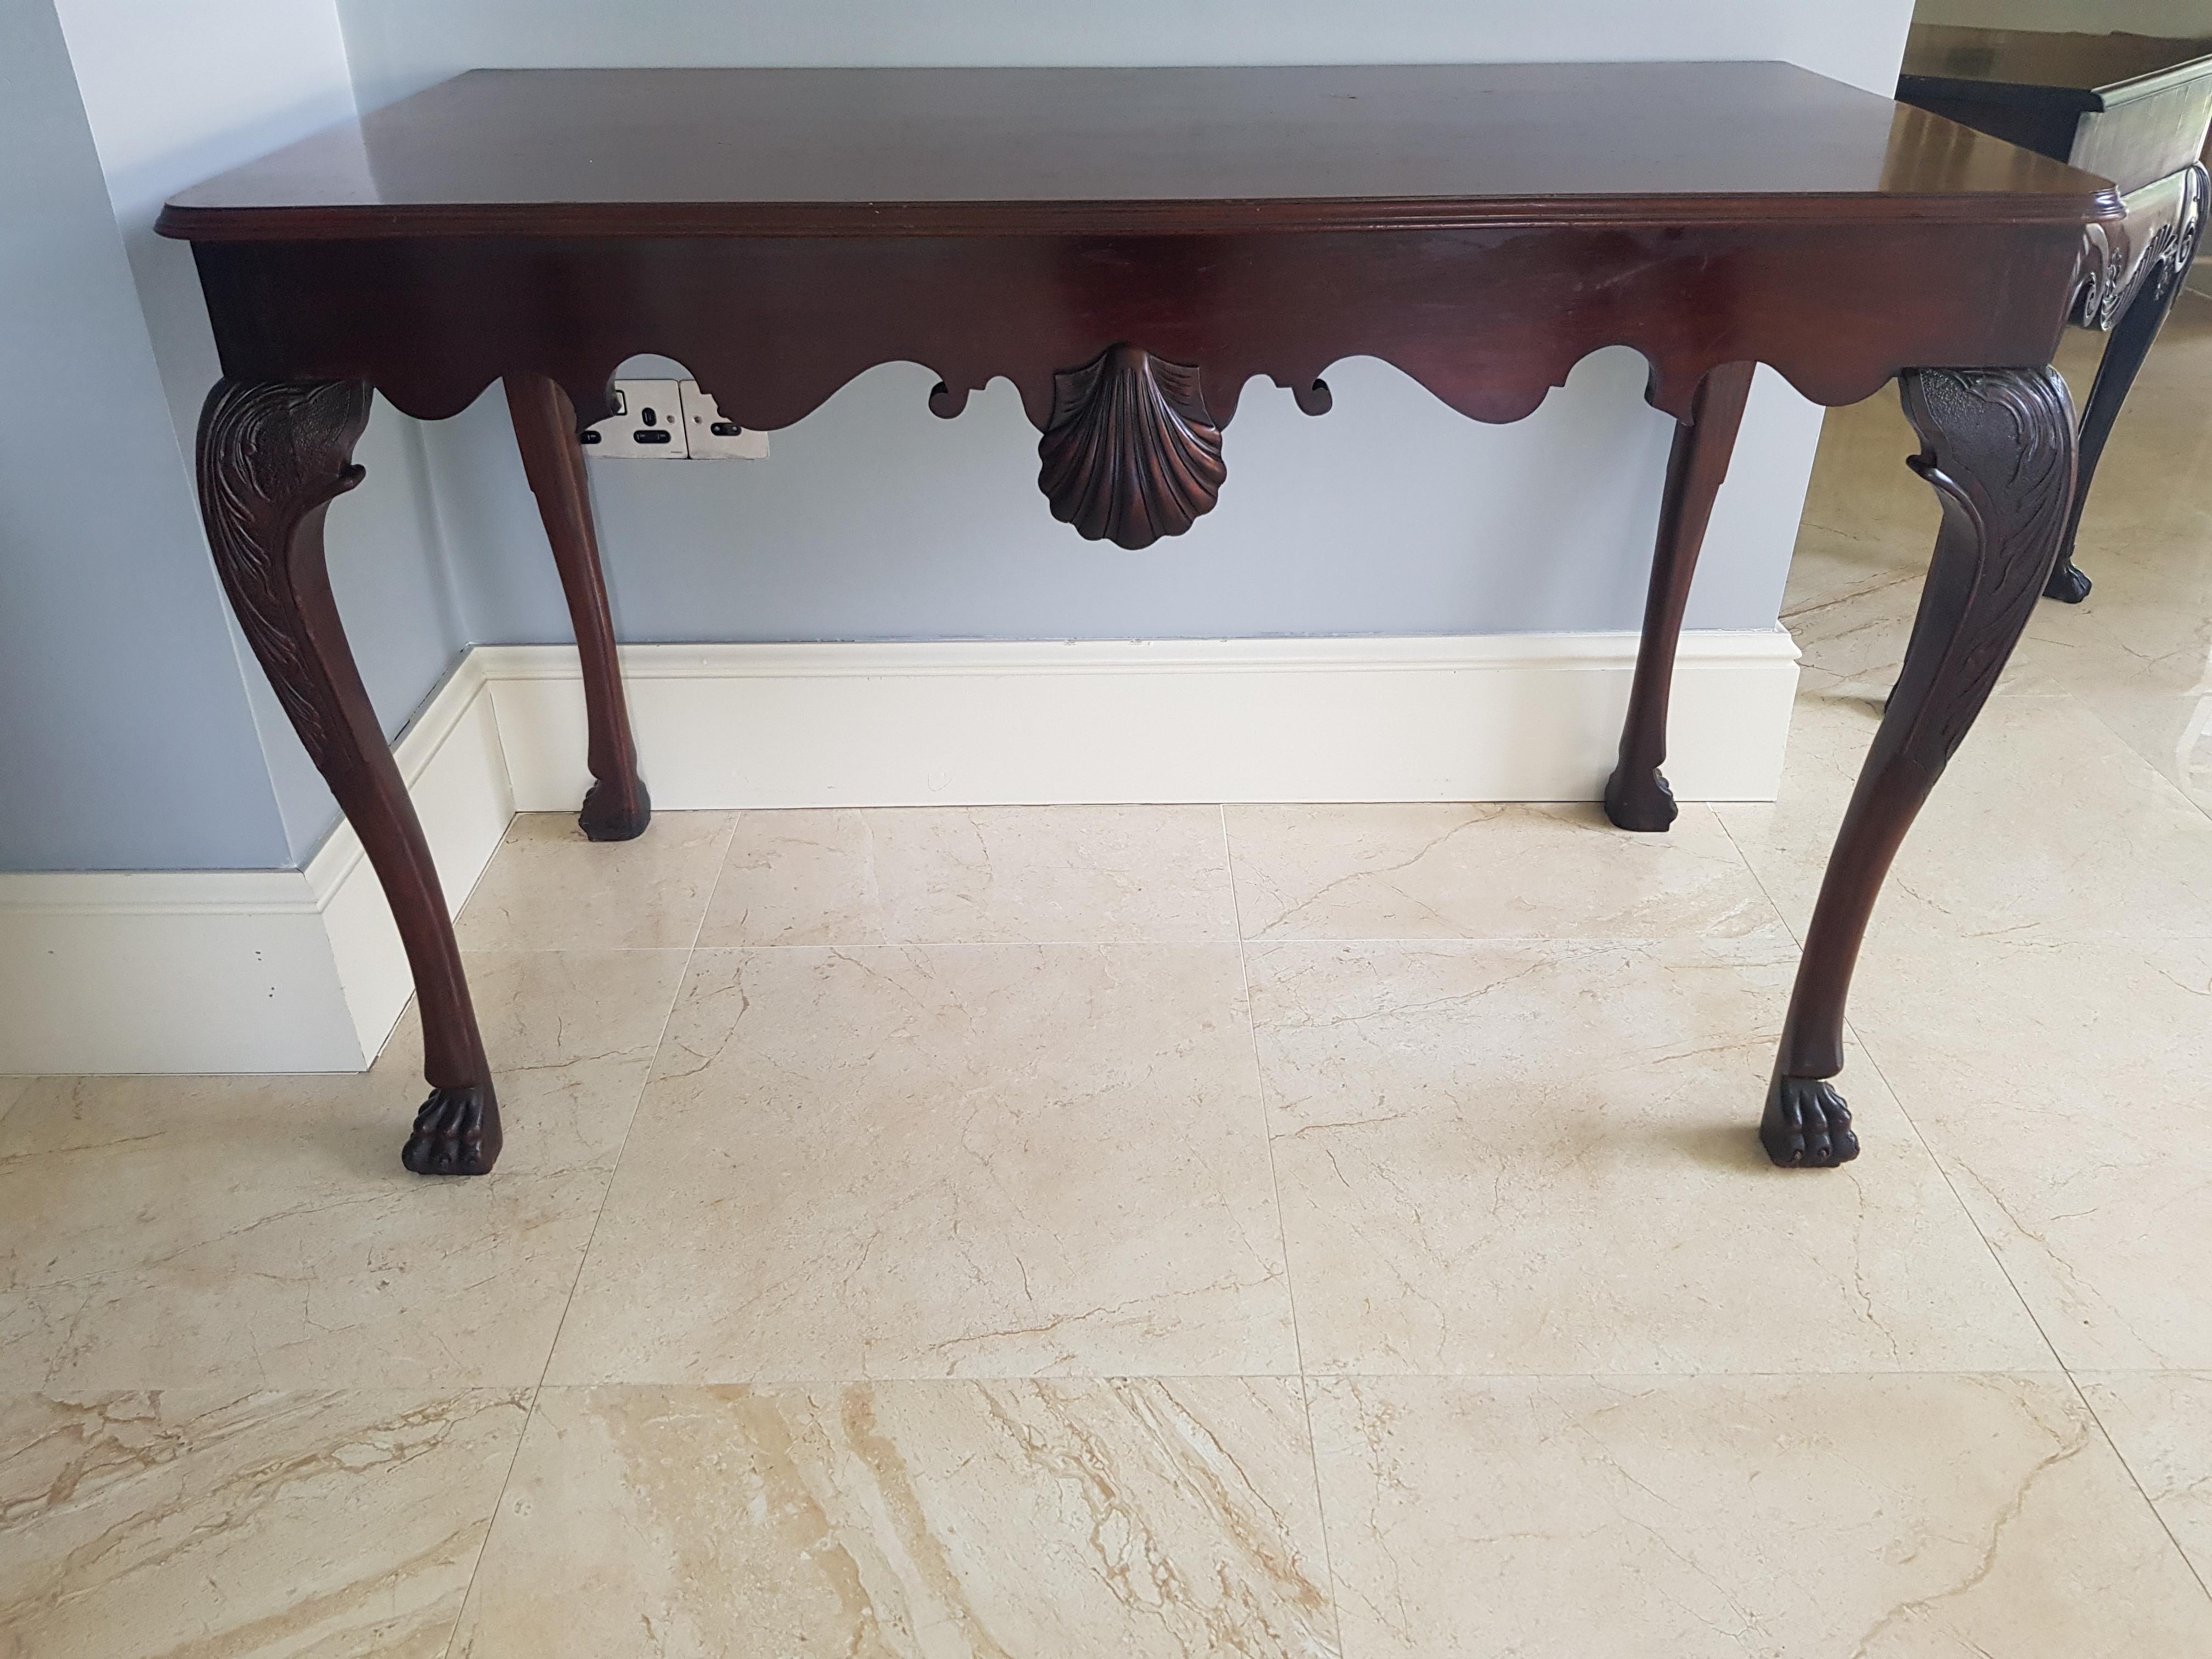 Irish 19th Century Finely Carved Mahogany Side Table Attributed to James Hicks In Good Condition For Sale In Dromod, Co. Leitrim